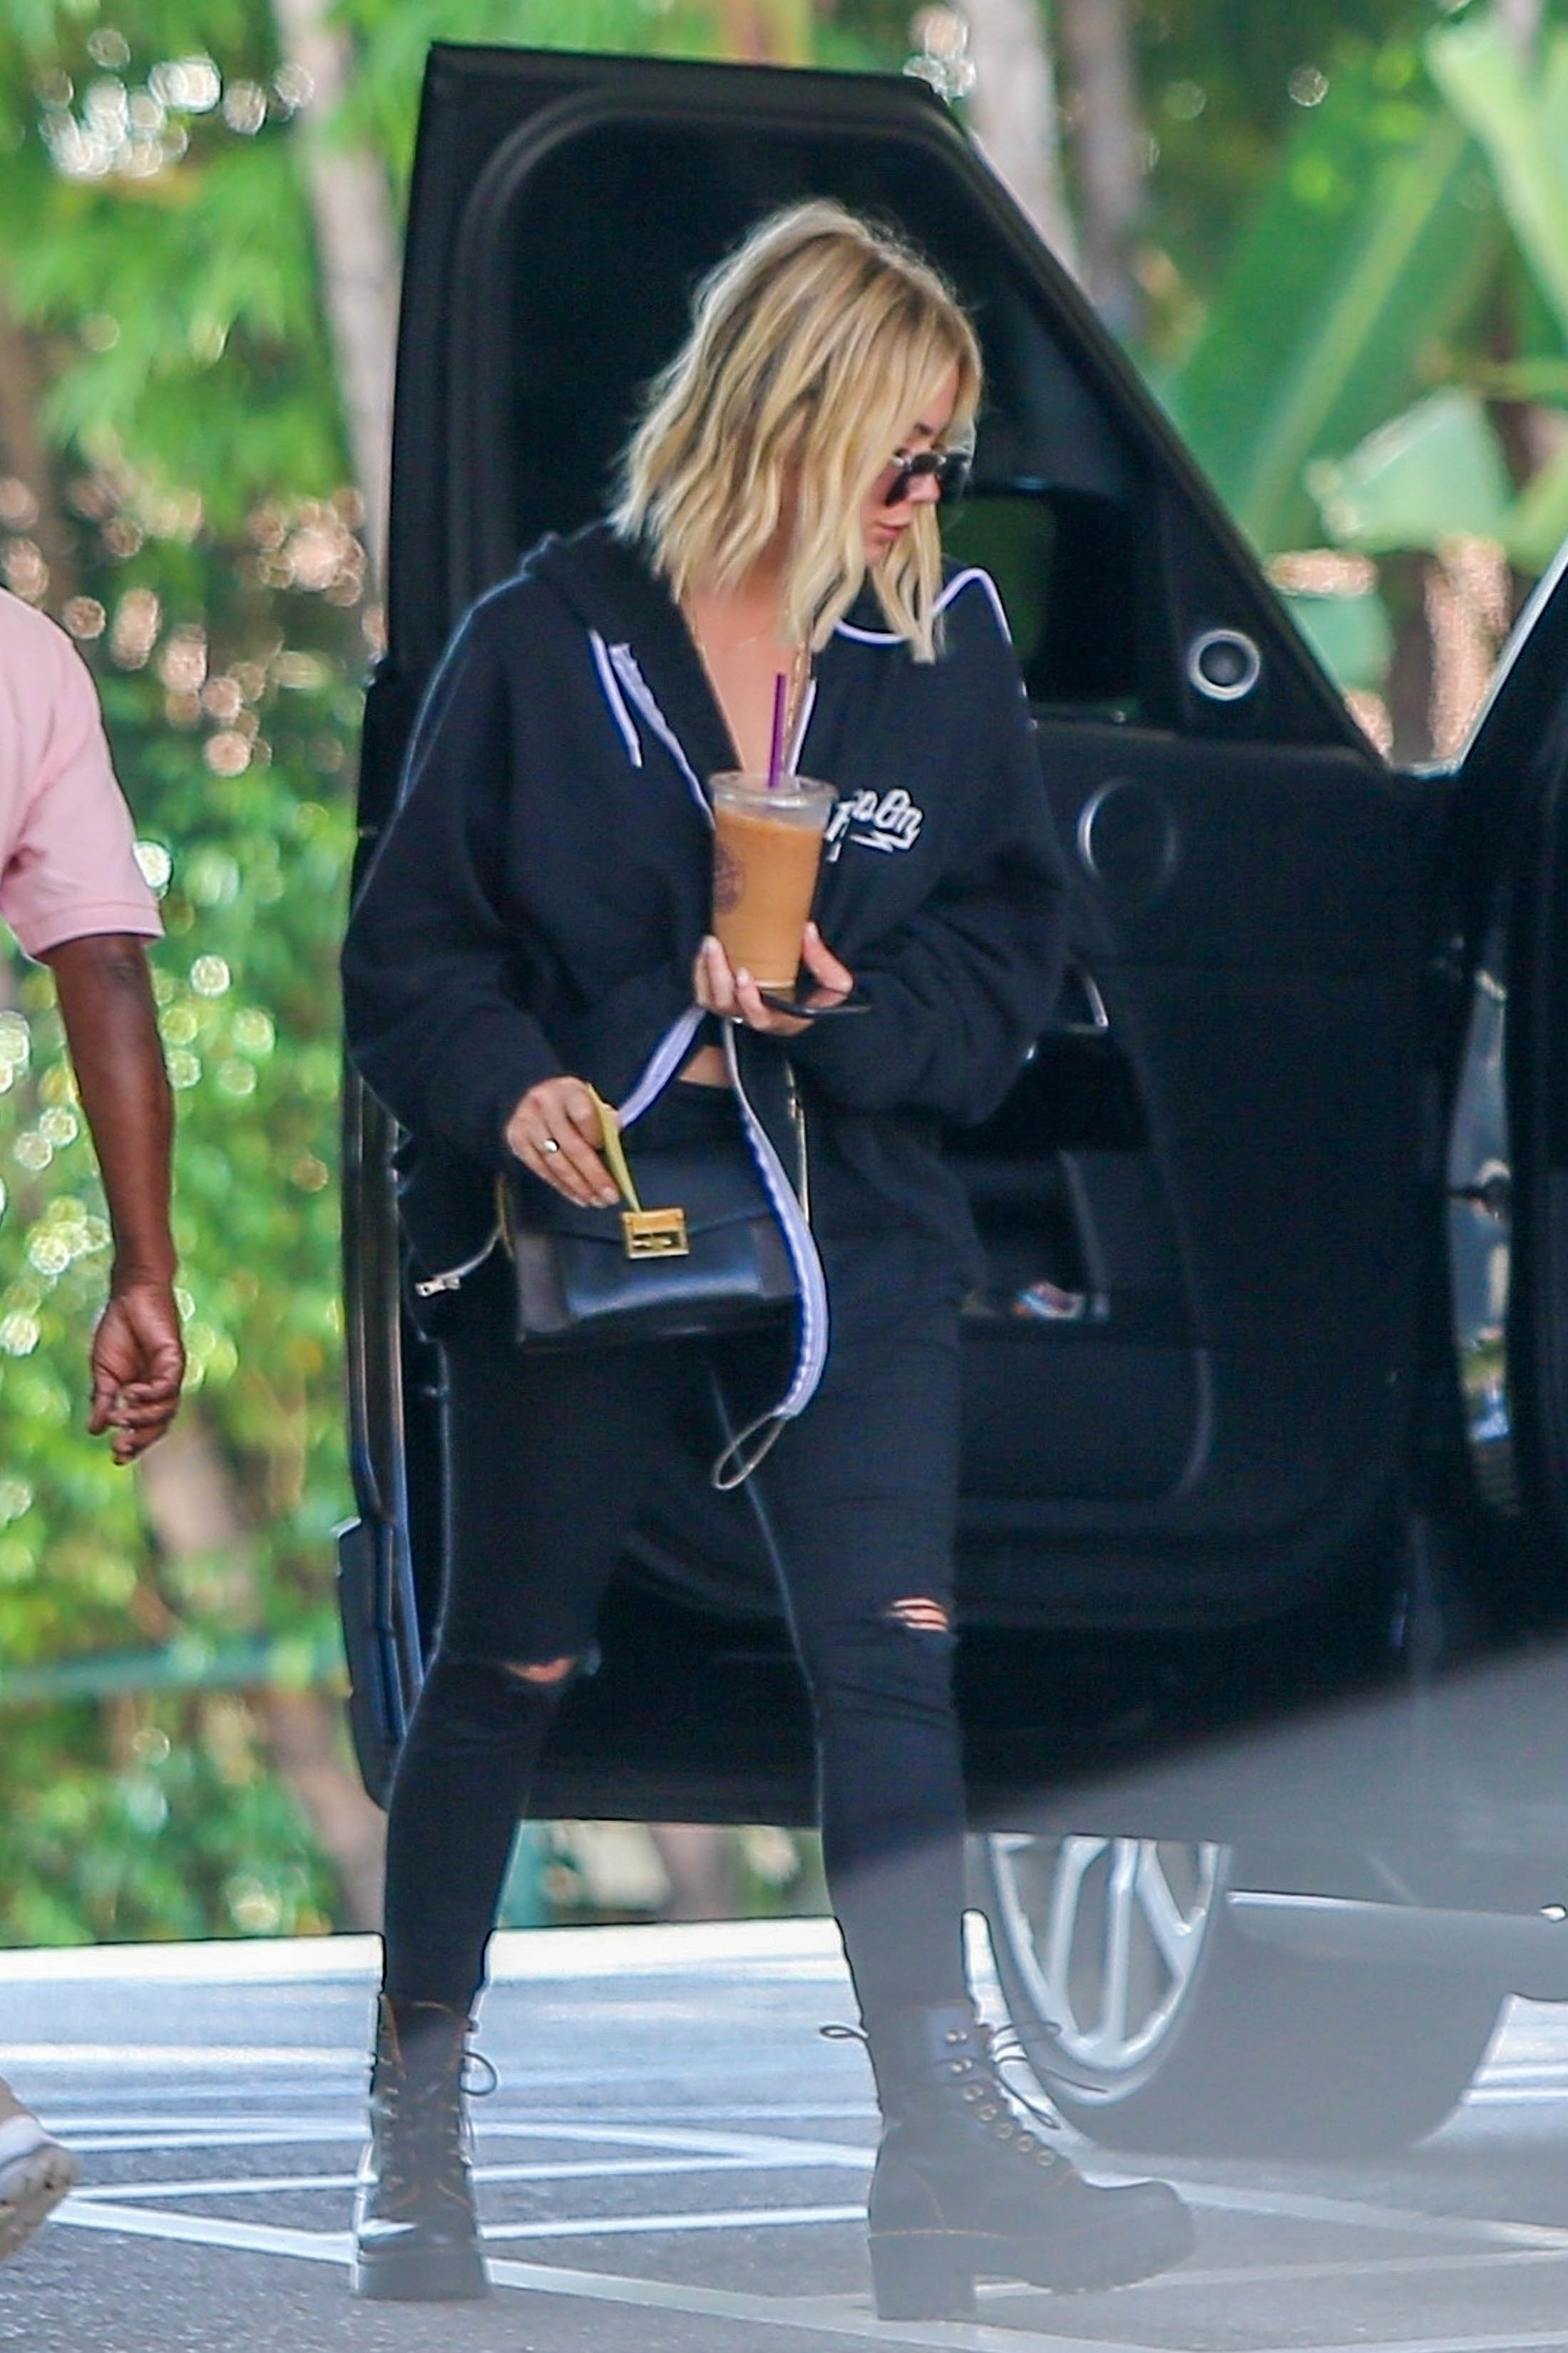 ashley-benson-out-in-beverly-hills-92118.jpg